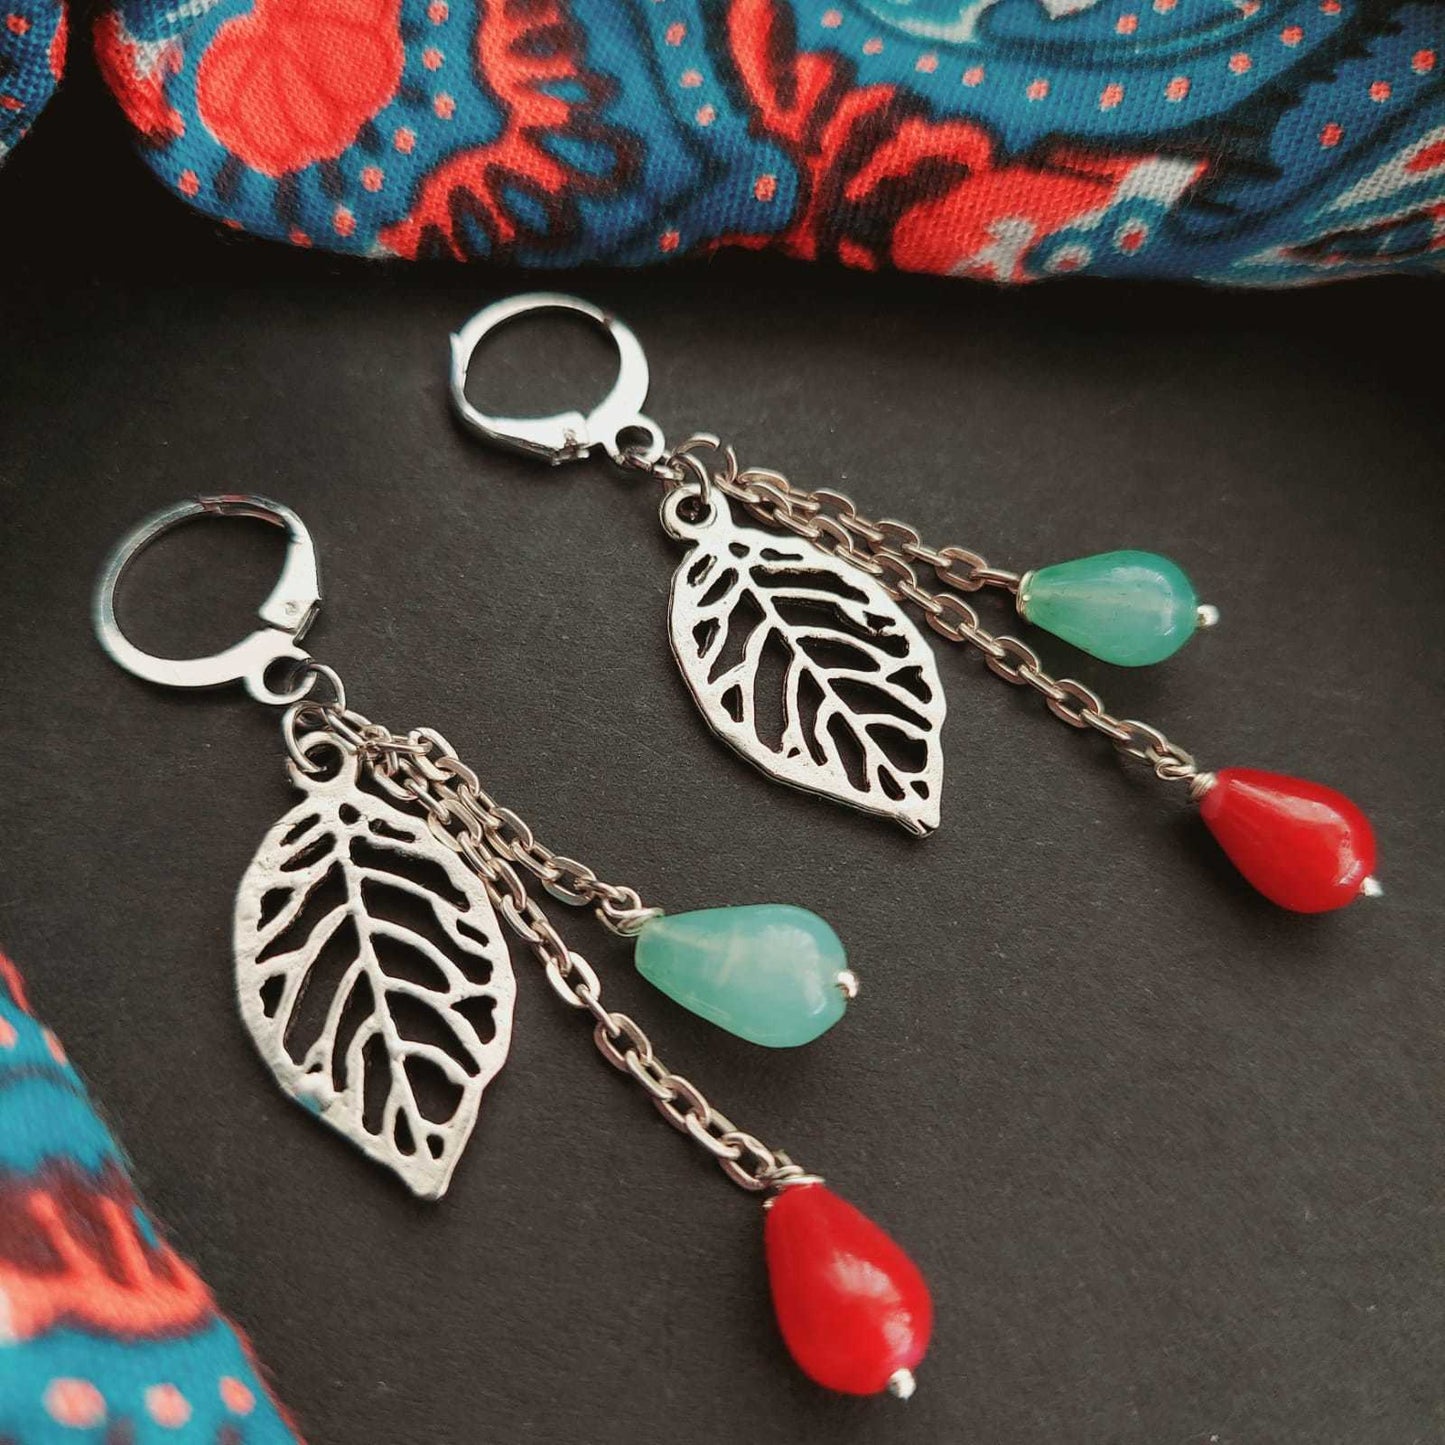 Hand Crafted Danglers with Leaf Charm and Beads